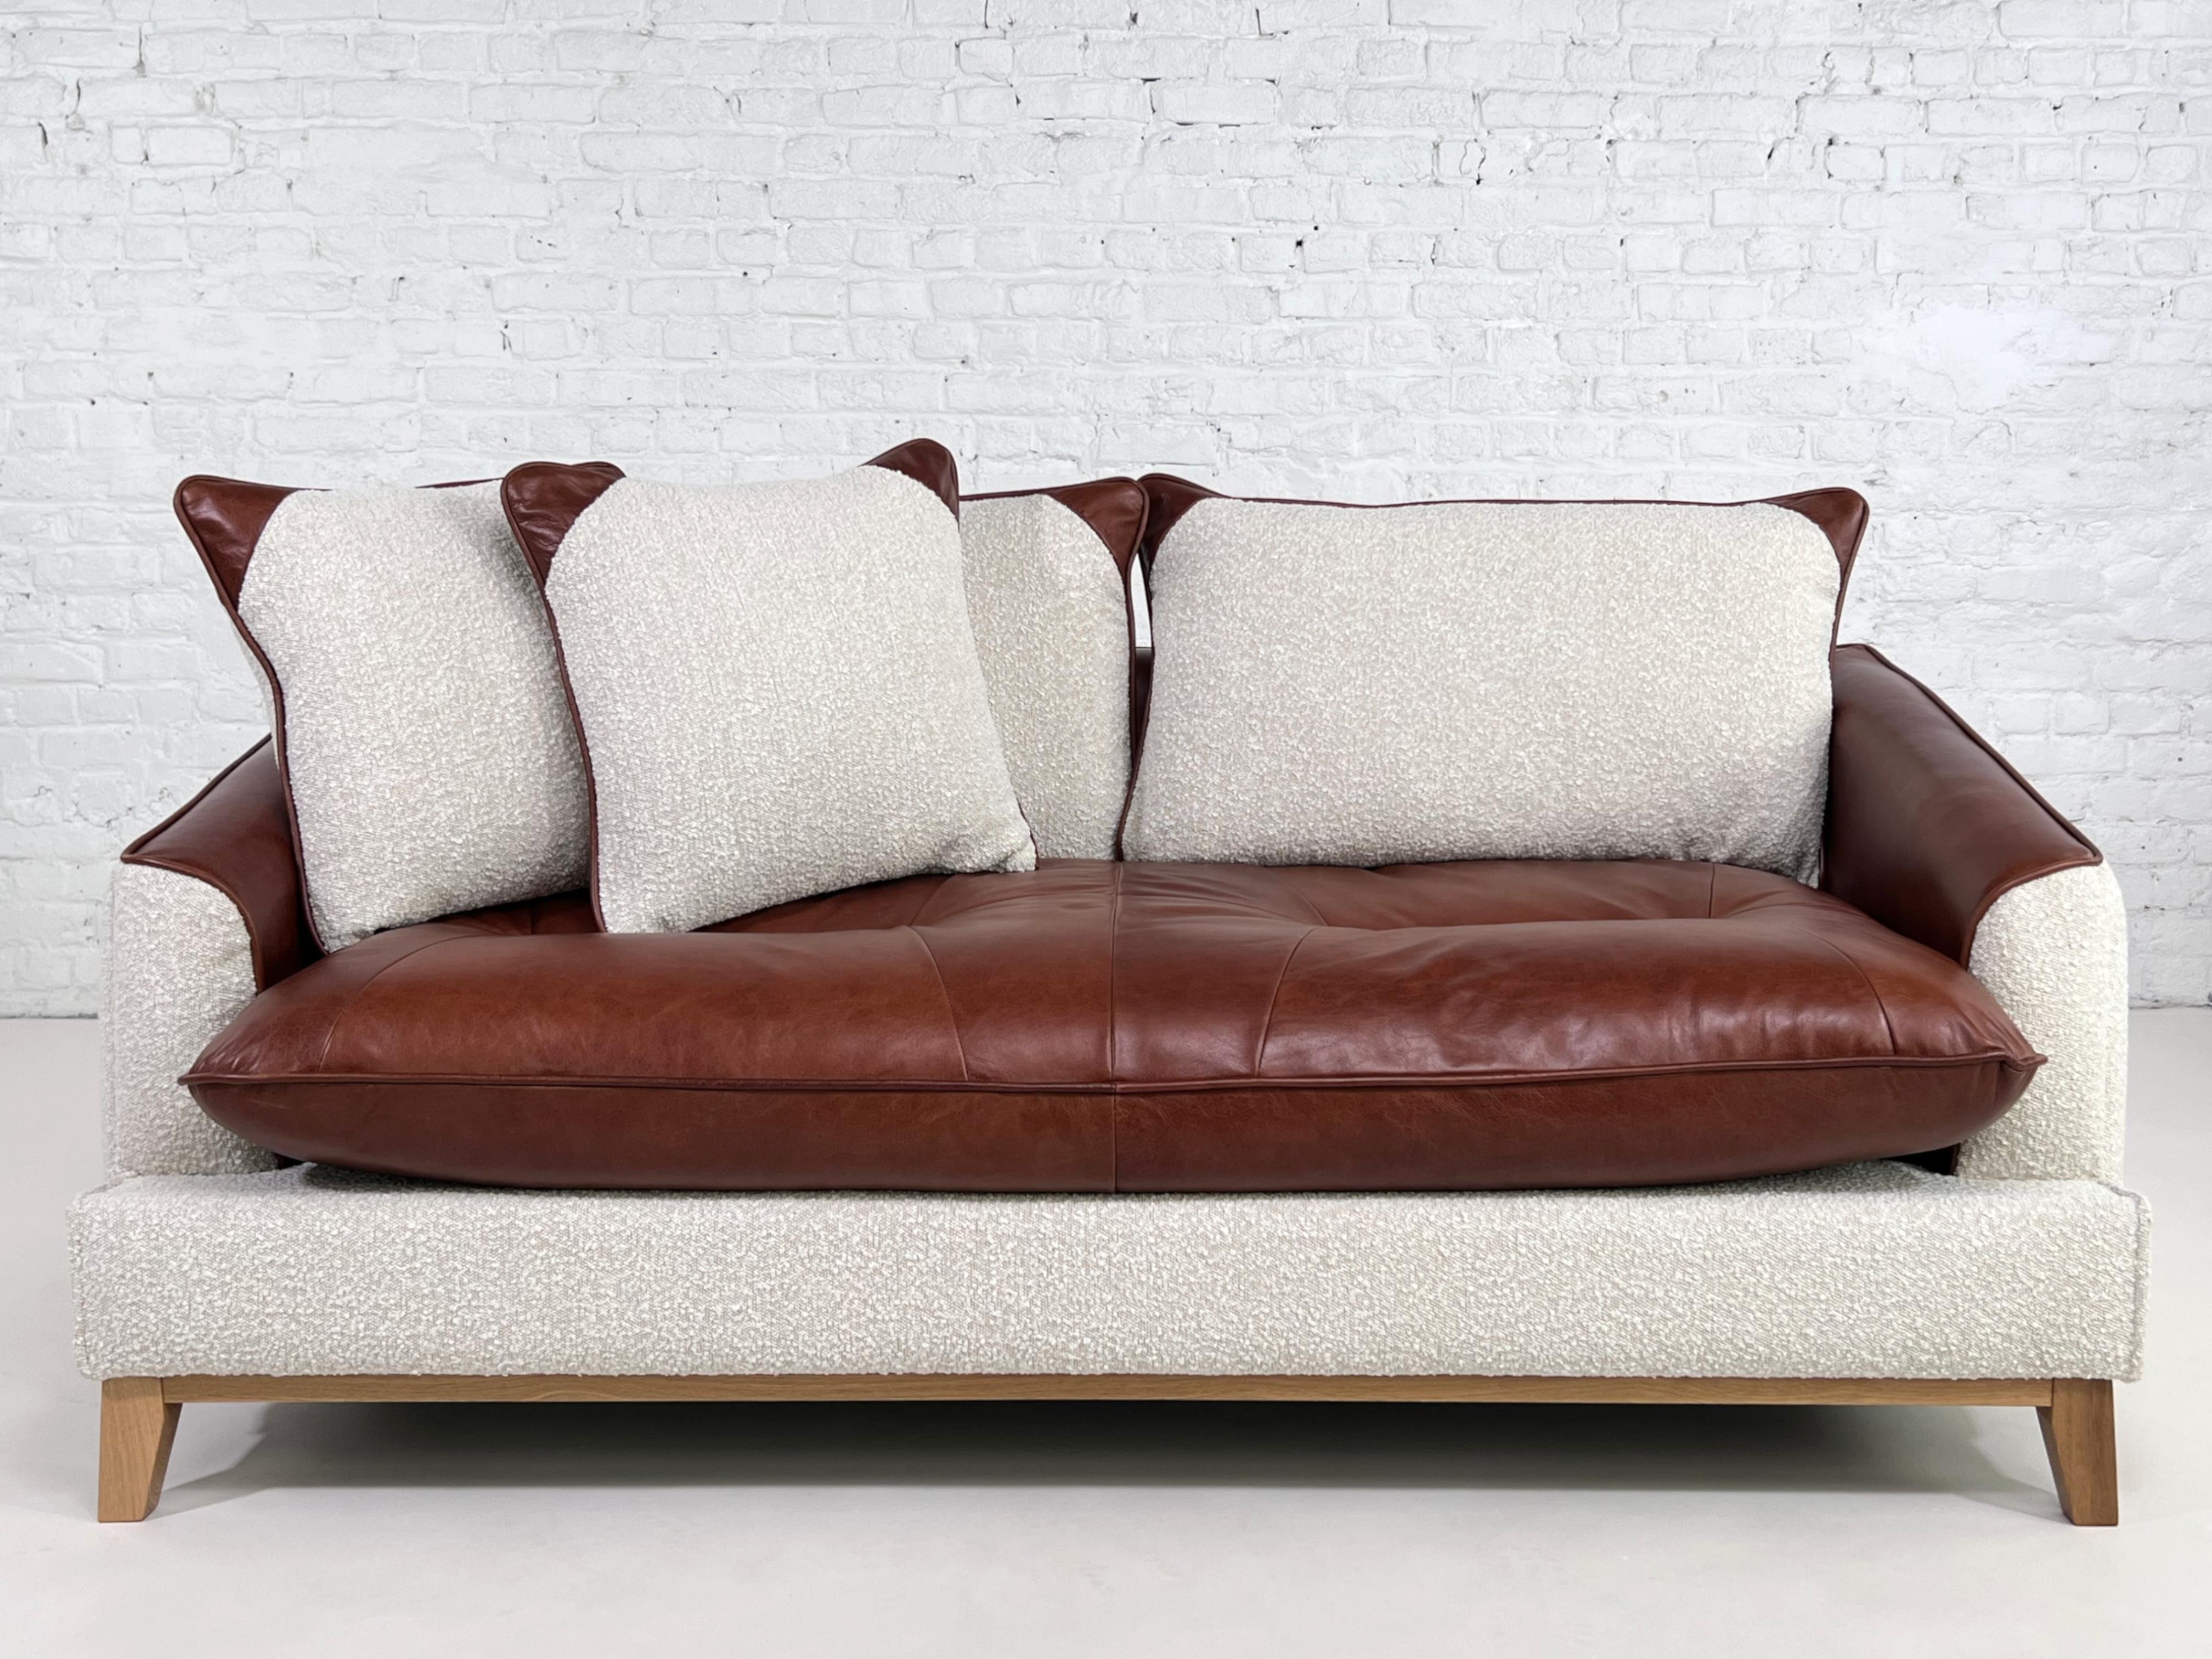 Mcm and Scandinavian Design Style Cognac Leather and Beige Bouclé Fabric Sofa In New Condition For Sale In Tourcoing, FR